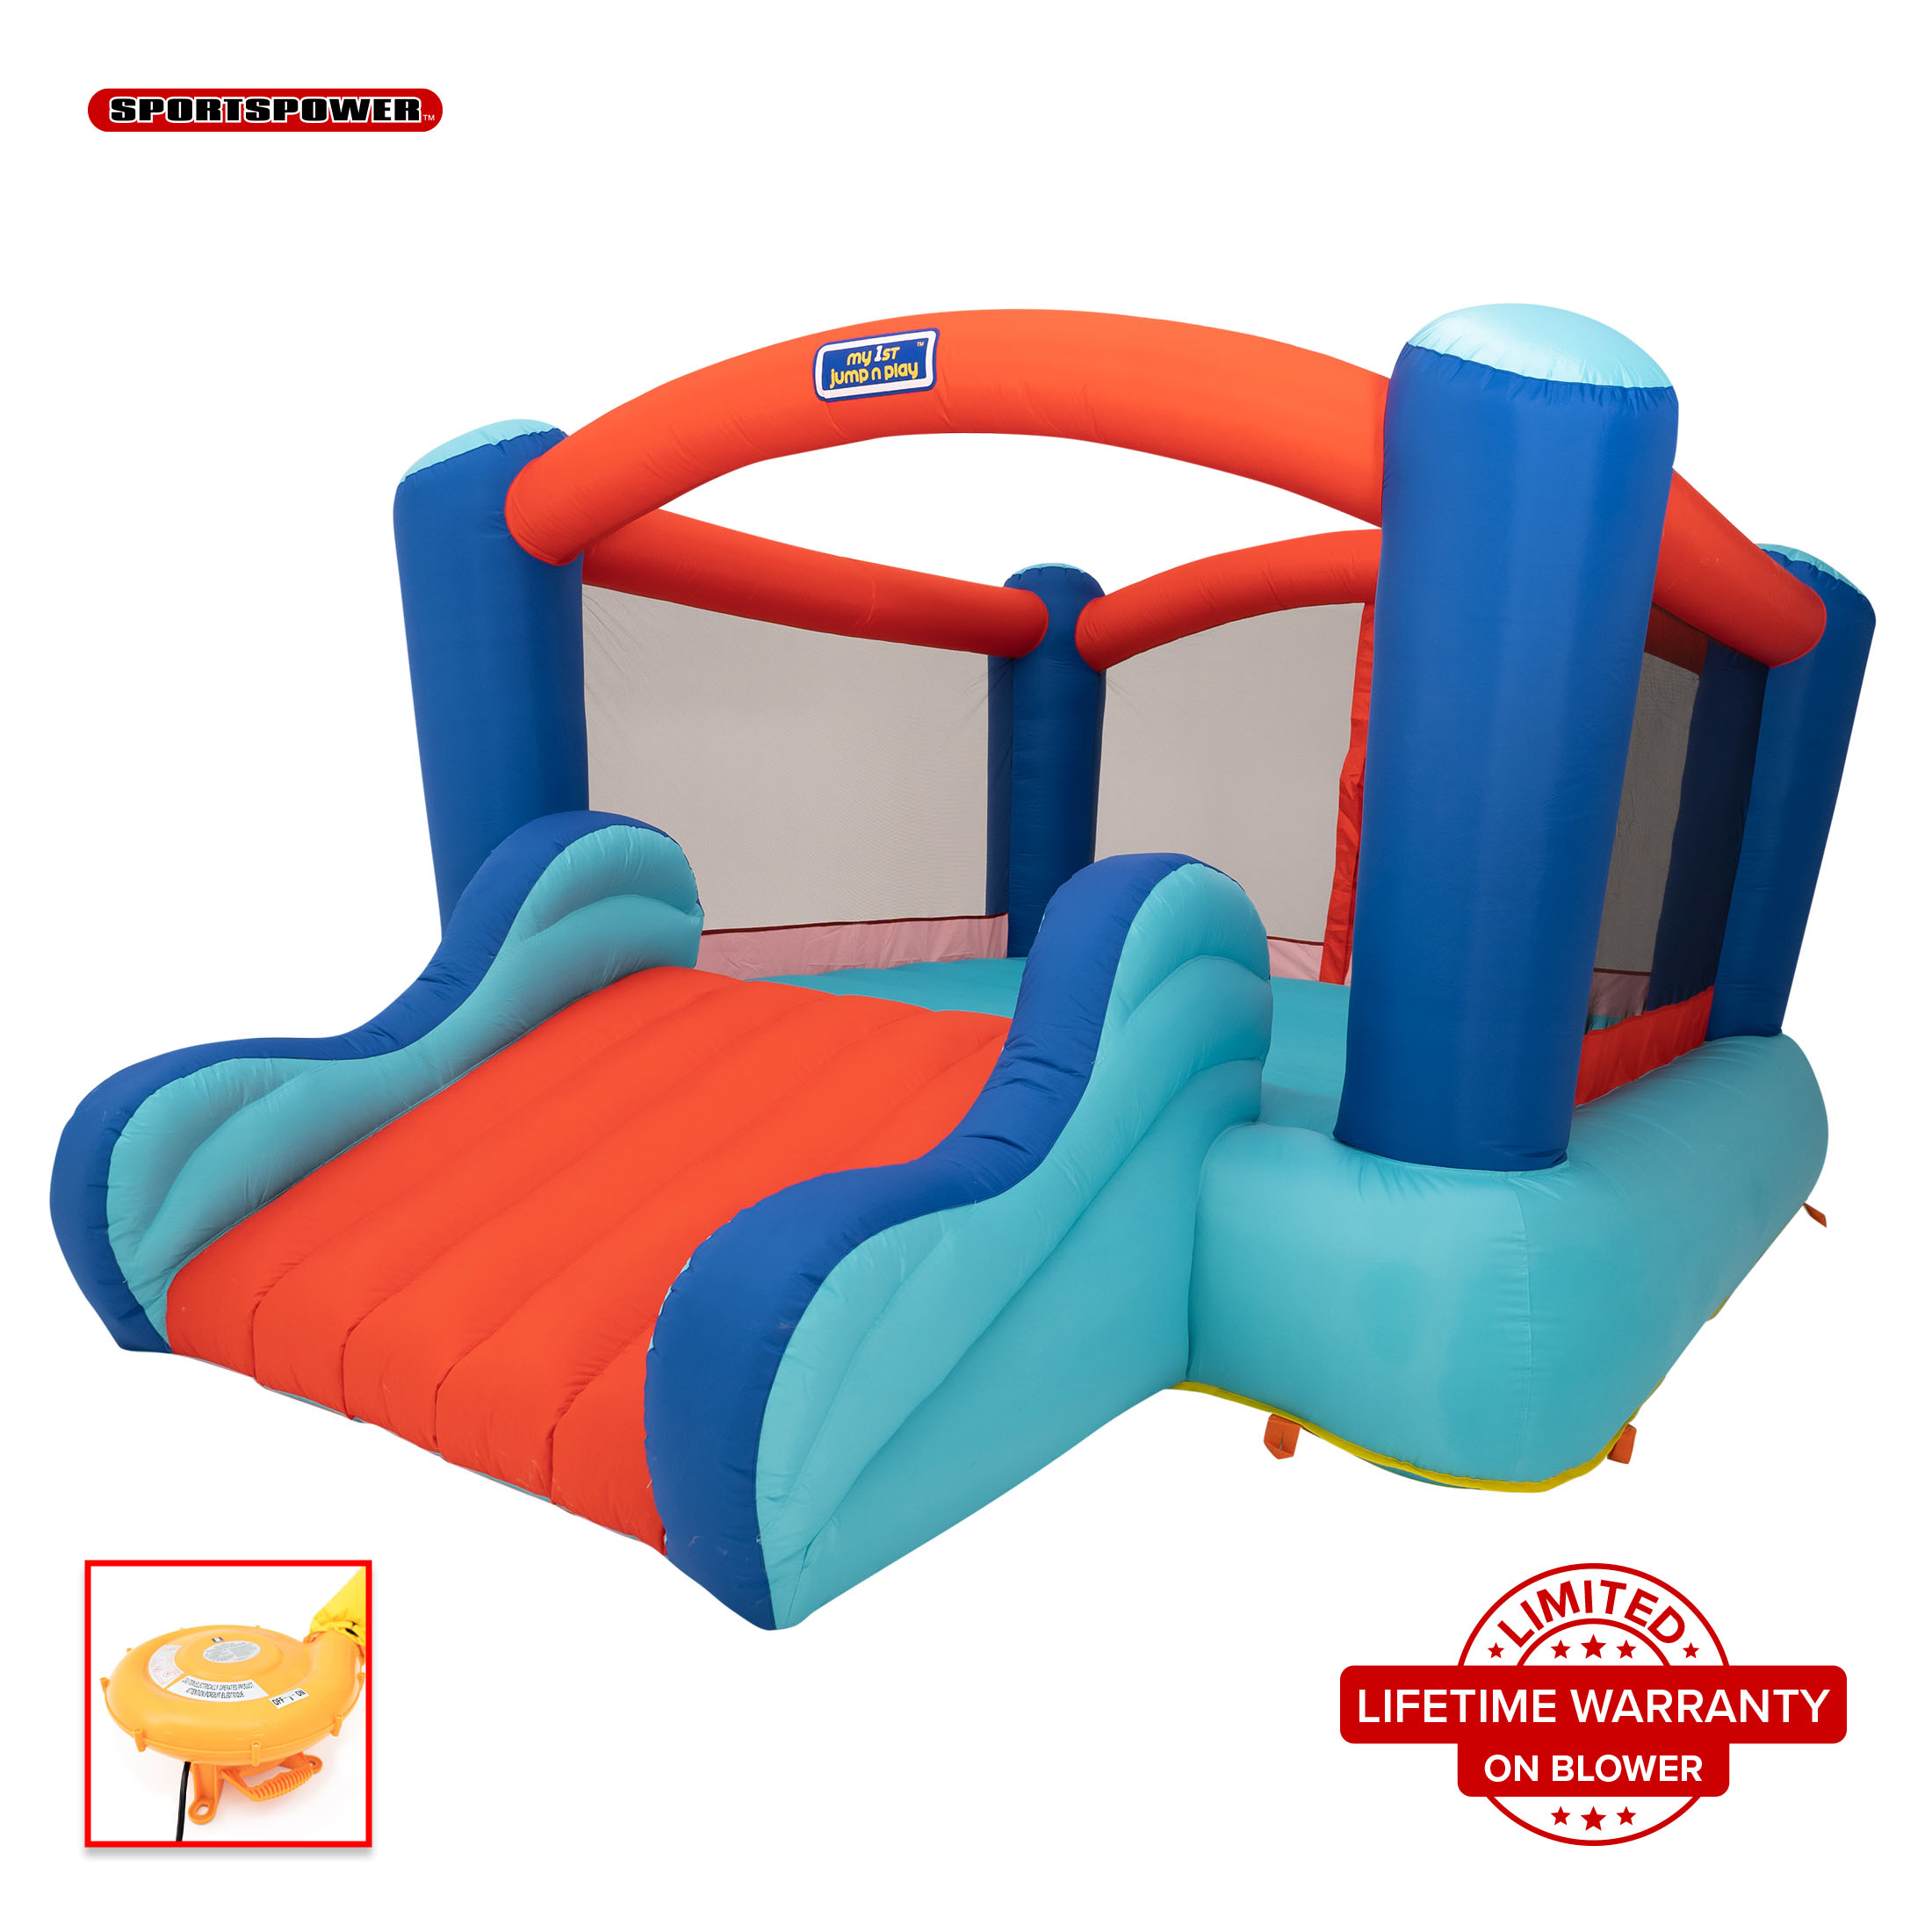 My First Inflatable Bounce House with Slide and with Lifetime Warranty on Heavy Duty Blower - image 1 of 8